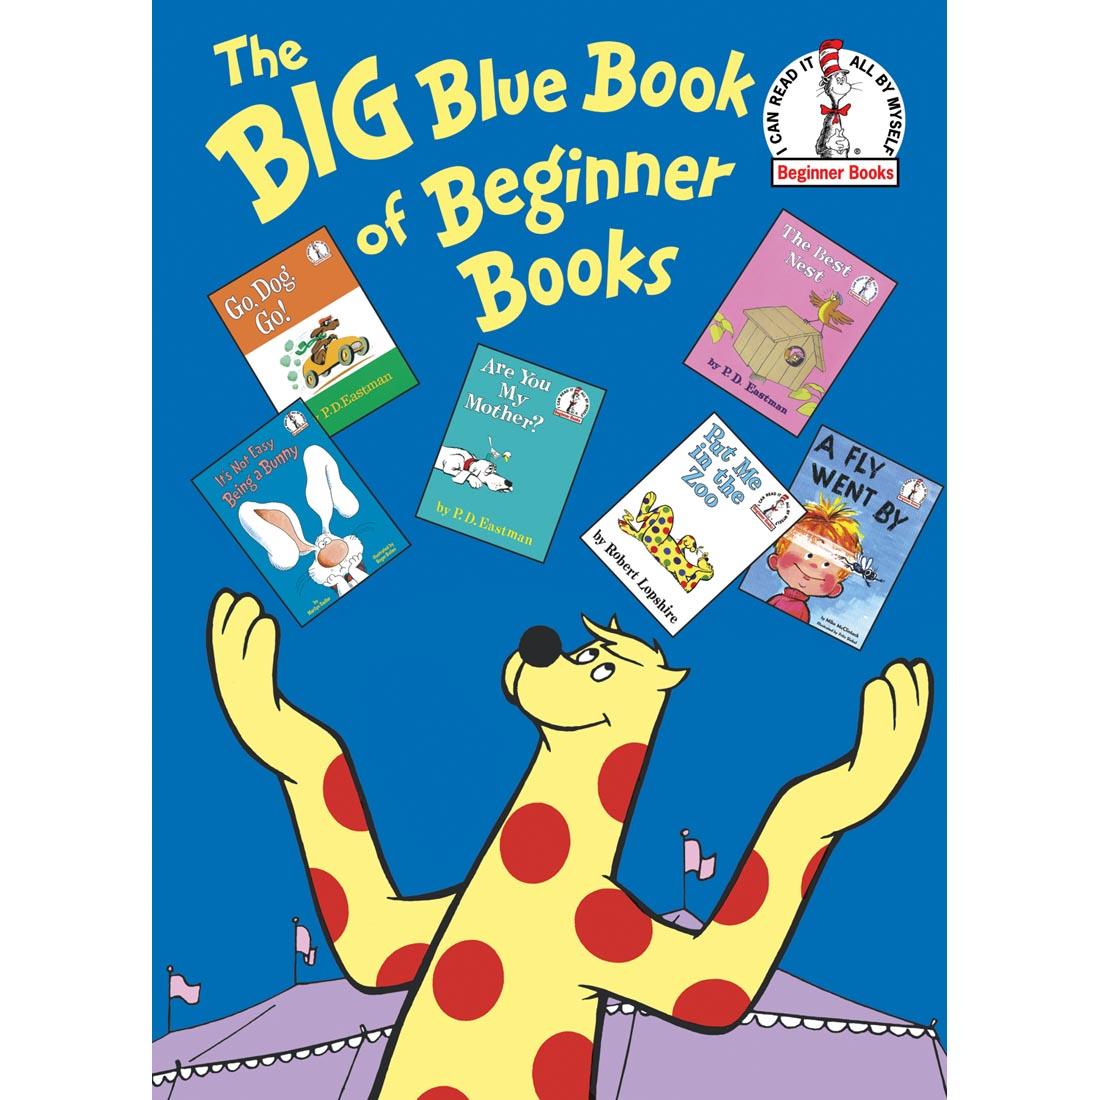 The Big Blue Book of Beginner Books includes Go, Dog, Go!; It's not Easy Being a Bunny; Are You My Mother?; The Best Nest; Put Me in the Zoo; A Fly Went By